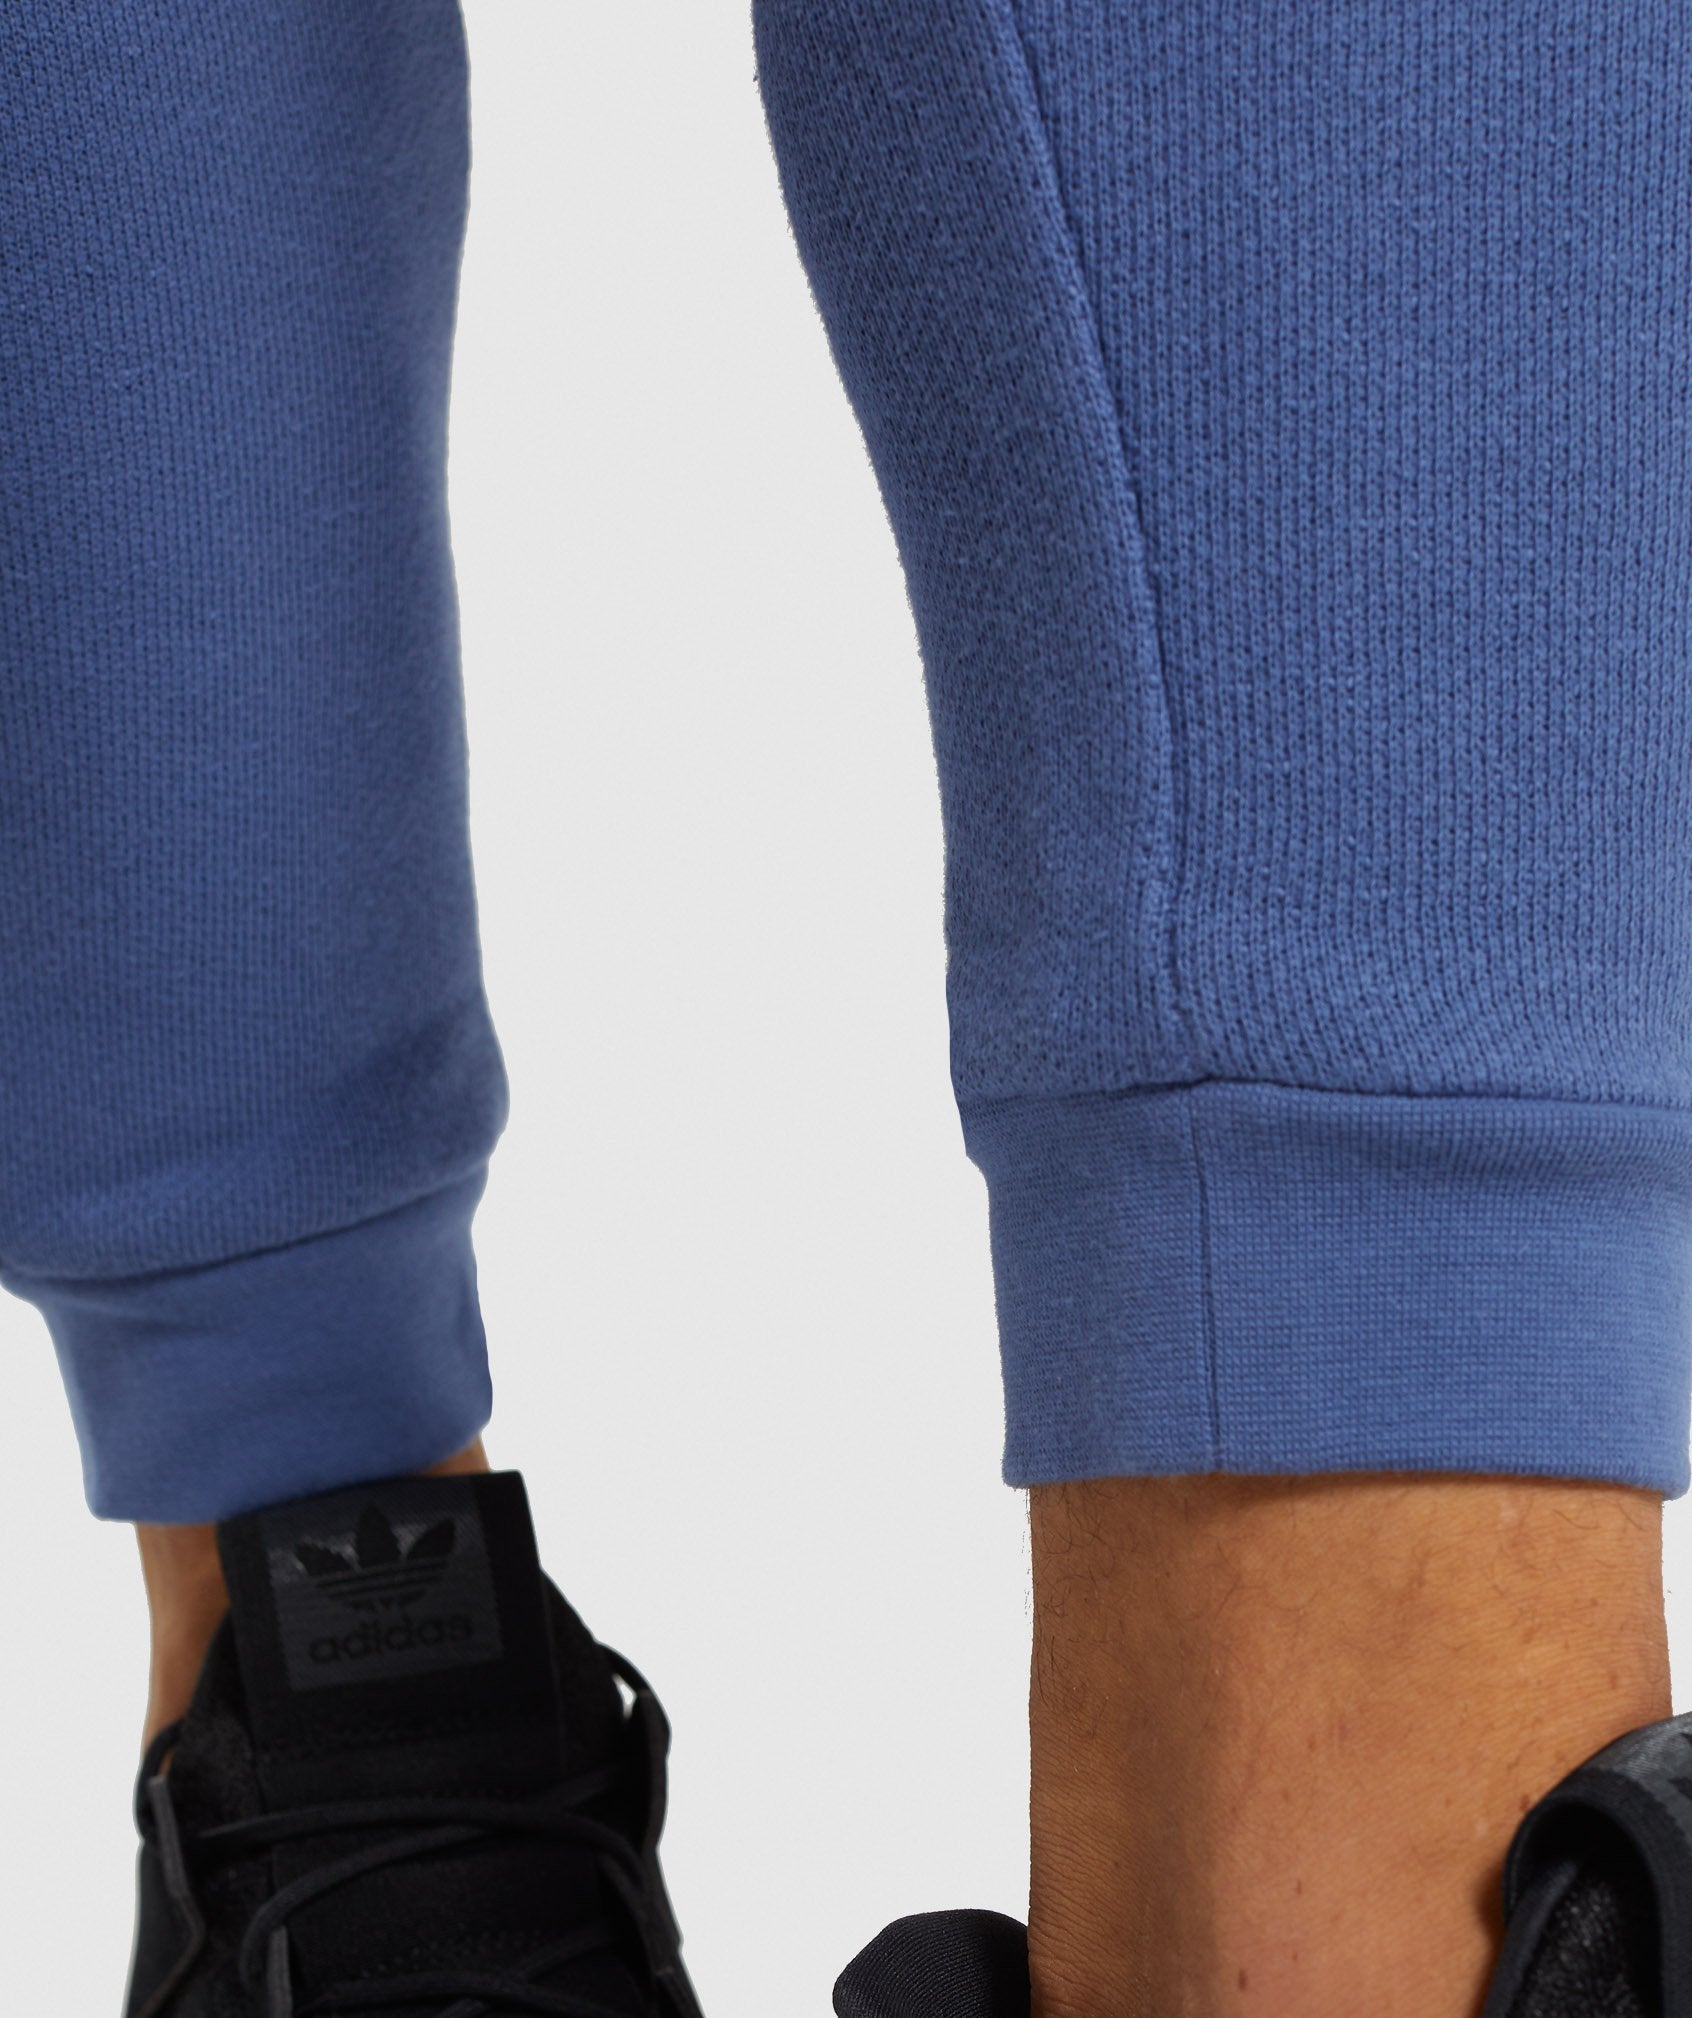 Urban Bottoms in Oxford Blue - view 6